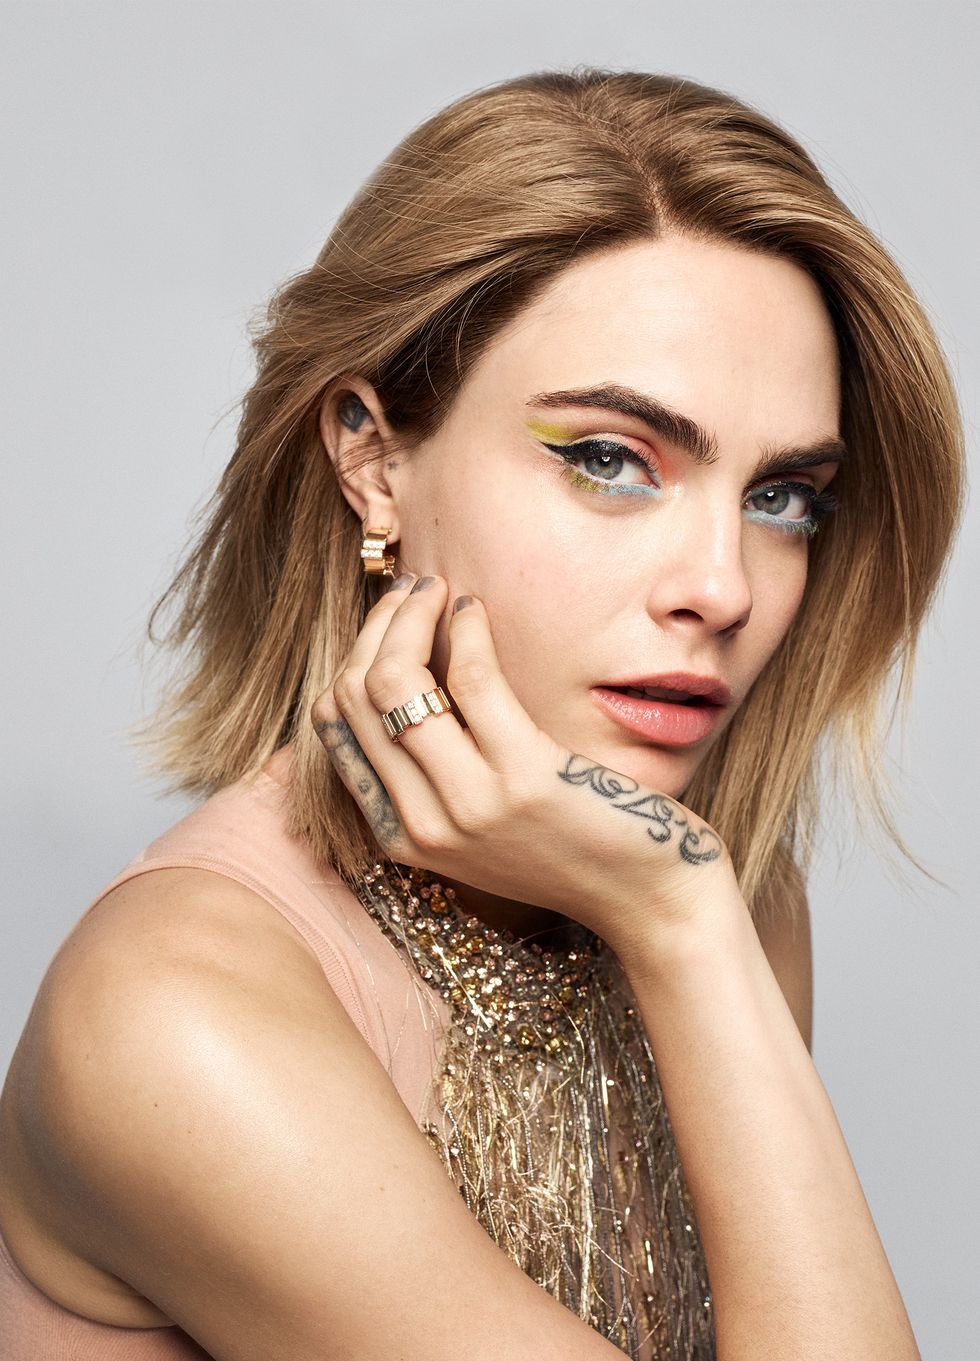 The Announcement Was Made In A Video Where Cara Delevingne Selling Vagina NFT